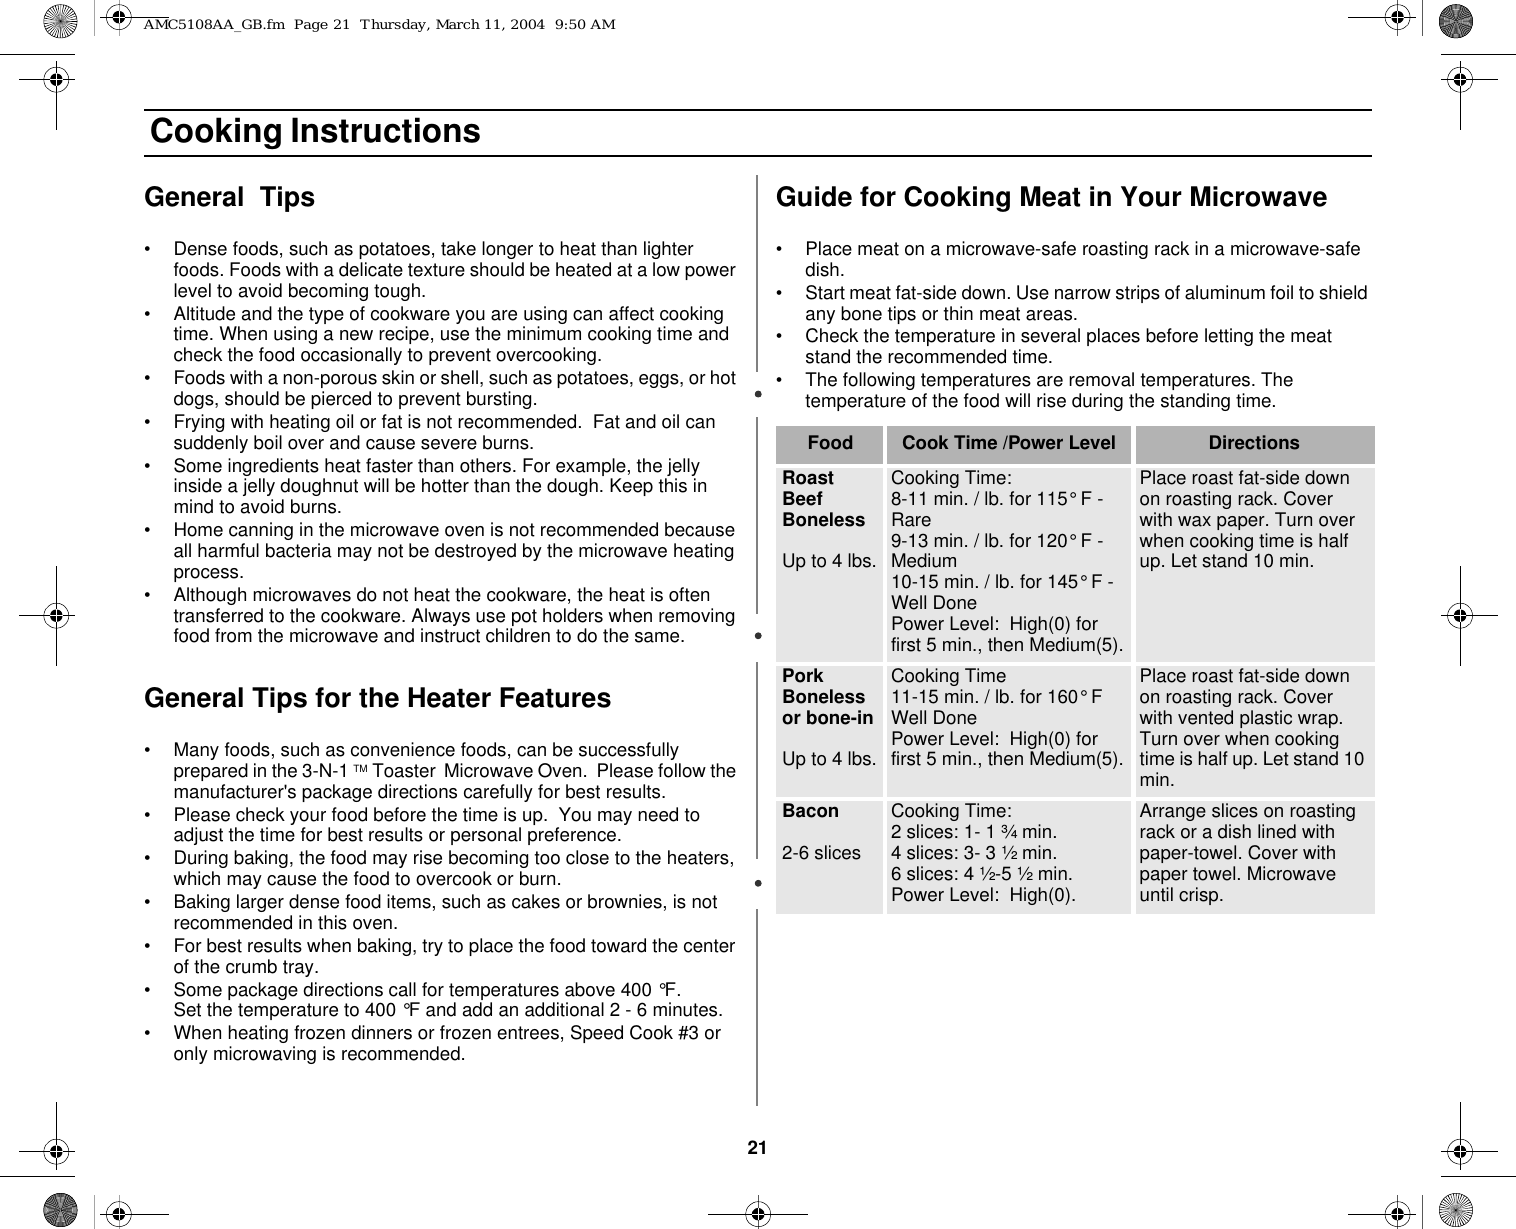 21 Cooking InstructionsGeneral  Tips • Dense foods, such as potatoes, take longer to heat than lighter foods. Foods with a delicate texture should be heated at a low power level to avoid becoming tough.• Altitude and the type of cookware you are using can affect cooking time. When using a new recipe, use the minimum cooking time and check the food occasionally to prevent overcooking.• Foods with a non-porous skin or shell, such as potatoes, eggs, or hot dogs, should be pierced to prevent bursting.• Frying with heating oil or fat is not recommended.  Fat and oil can suddenly boil over and cause severe burns.• Some ingredients heat faster than others. For example, the jelly inside a jelly doughnut will be hotter than the dough. Keep this in mind to avoid burns.• Home canning in the microwave oven is not recommended because all harmful bacteria may not be destroyed by the microwave heating process.• Although microwaves do not heat the cookware, the heat is often transferred to the cookware. Always use pot holders when removing food from the microwave and instruct children to do the same.General Tips for the Heater Features• Many foods, such as convenience foods, can be successfully prepared in the 3-N-1 TM Toaster  Microwave Oven.  Please follow the manufacturer&apos;s package directions carefully for best results.• Please check your food before the time is up.  You may need to adjust the time for best results or personal preference.• During baking, the food may rise becoming too close to the heaters, which may cause the food to overcook or burn.• Baking larger dense food items, such as cakes or brownies, is not recommended in this oven.• For best results when baking, try to place the food toward the center of the crumb tray. • Some package directions call for temperatures above 400 °F.        Set the temperature to 400 °F and add an additional 2 - 6 minutes.• When heating frozen dinners or frozen entrees, Speed Cook #3 or only microwaving is recommended.Guide for Cooking Meat in Your Microwave• Place meat on a microwave-safe roasting rack in a microwave-safe dish.• Start meat fat-side down. Use narrow strips of aluminum foil to shield any bone tips or thin meat areas.• Check the temperature in several places before letting the meat stand the recommended time.• The following temperatures are removal temperatures. The temperature of the food will rise during the standing time.Food Cook Time /Power Level DirectionsRoast Beef BonelessUp to 4 lbs.Cooking Time:8-11 min. / lb. for 115° F - Rare 9-13 min. / lb. for 120° F - Medium10-15 min. / lb. for 145° F - Well DonePower Level:  High(0) for first 5 min., then Medium(5).Place roast fat-side down on roasting rack. Cover with wax paper. Turn over when cooking time is half up. Let stand 10 min.Pork Boneless or bone-inUp to 4 lbs.Cooking Time11-15 min. / lb. for 160° F Well Done Power Level:  High(0) for first 5 min., then Medium(5).Place roast fat-side down on roasting rack. Cover with vented plastic wrap. Turn over when cooking time is half up. Let stand 10 min.Bacon 2-6 slicesCooking Time:  2 slices: 1- 1 ¾ min.4 slices: 3- 3 ½ min.6 slices: 4 ½-5 ½ min.Power Level:  High(0).Arrange slices on roasting rack or a dish lined with paper-towel. Cover with paper towel. Microwave until crisp.AMC5108AA_GB.fm  Page 21  Thursday, March 11, 2004  9:50 AM